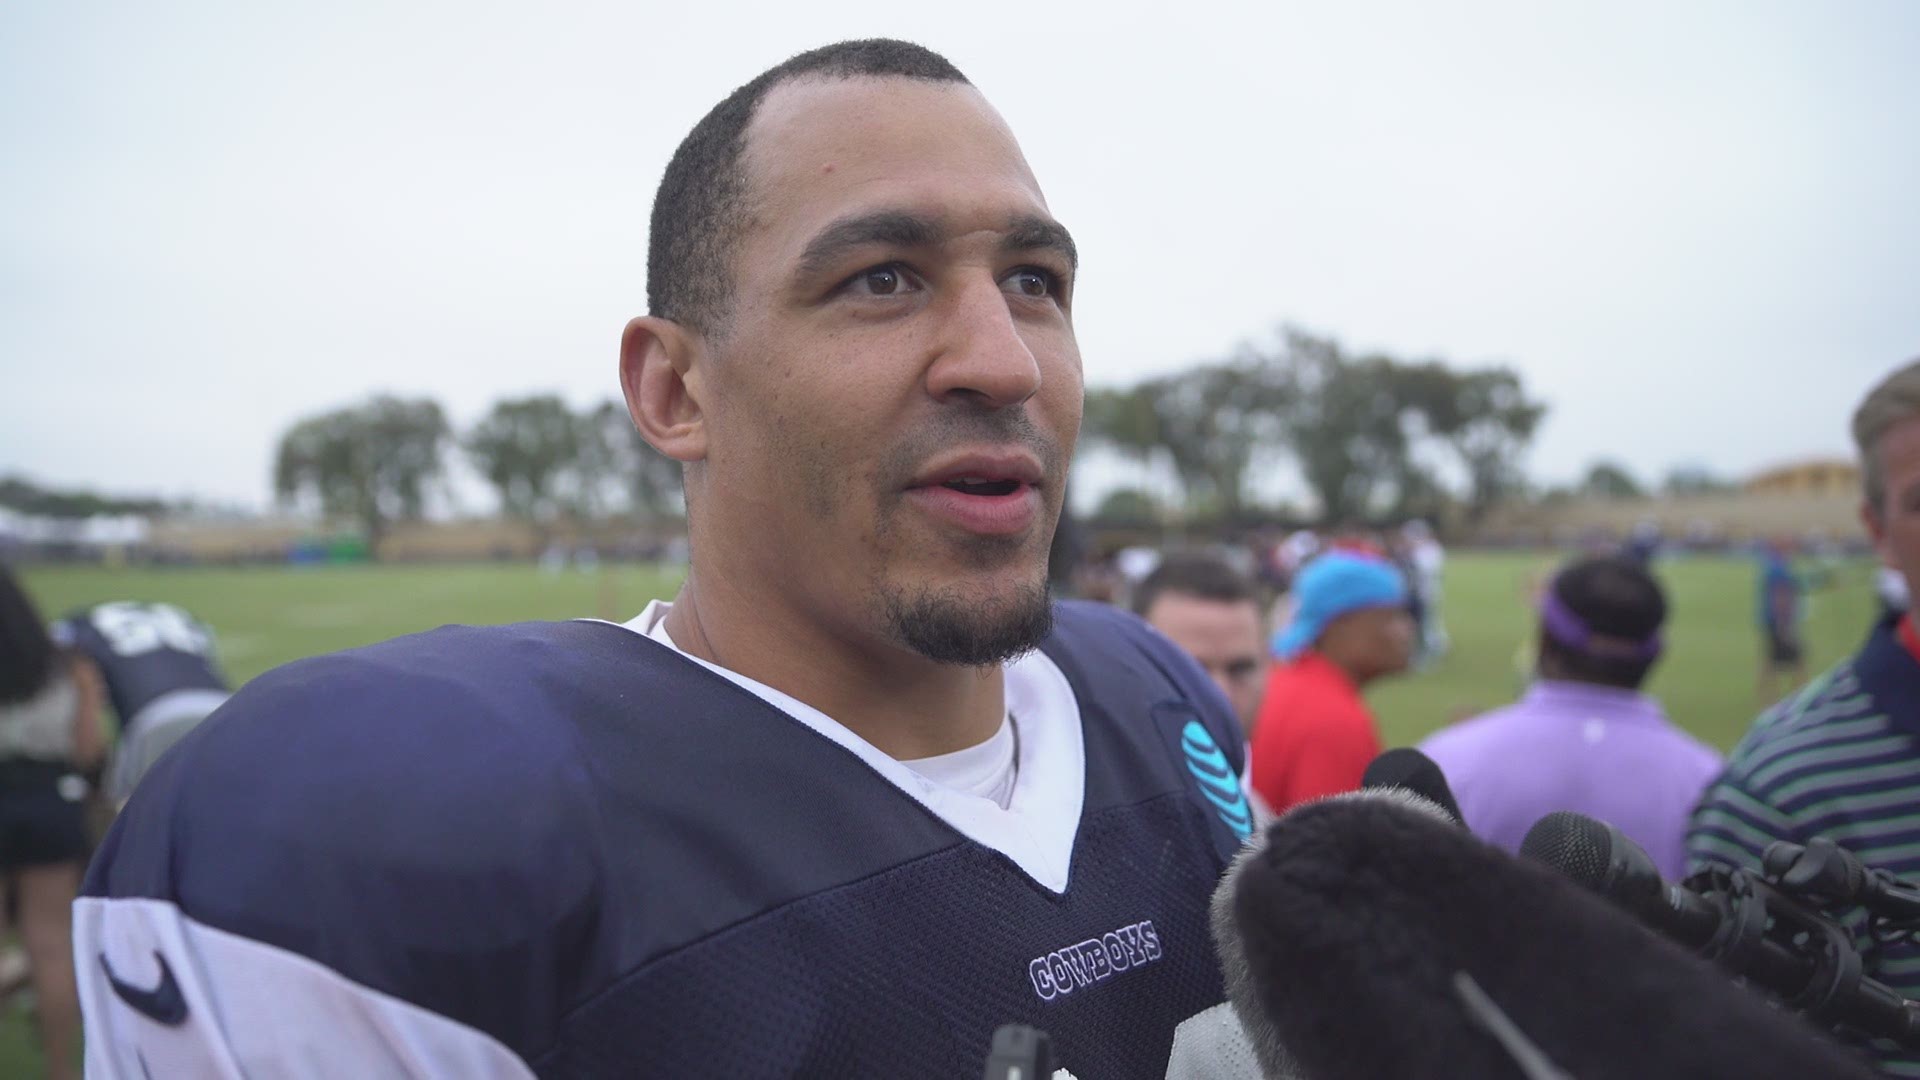 Cowboys defensive end Tyrone Crawford weighed in on his hilarious exchange with the Madden video game. WFAA.com